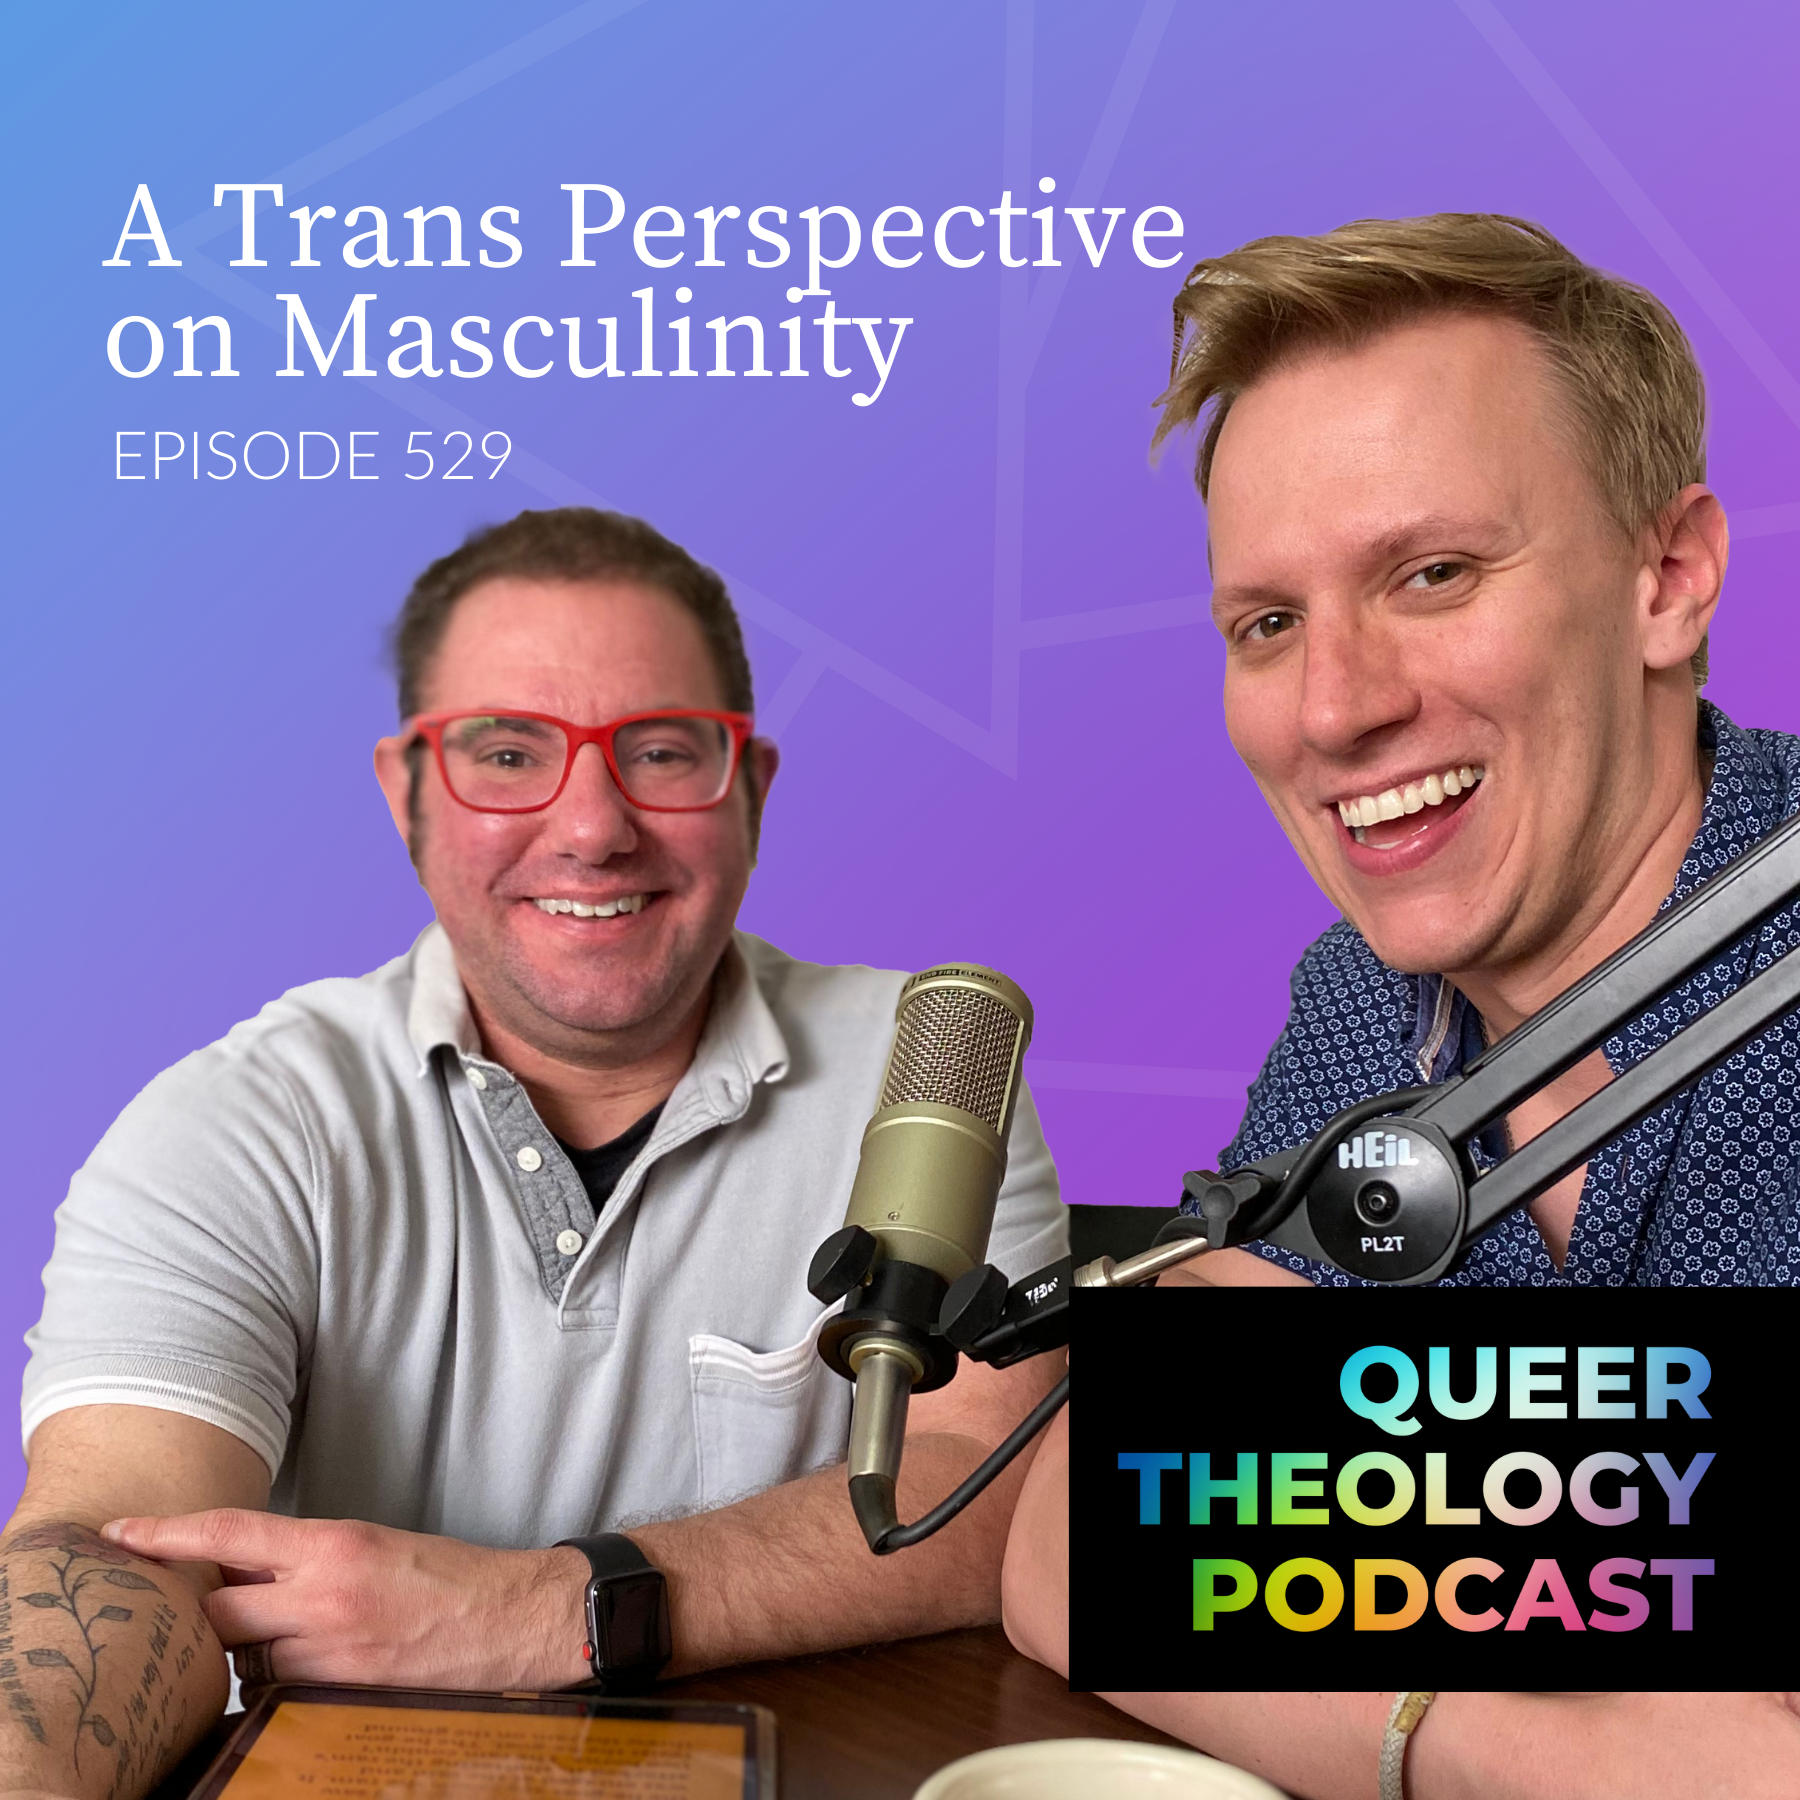 A Trans Perspective on Masculinity